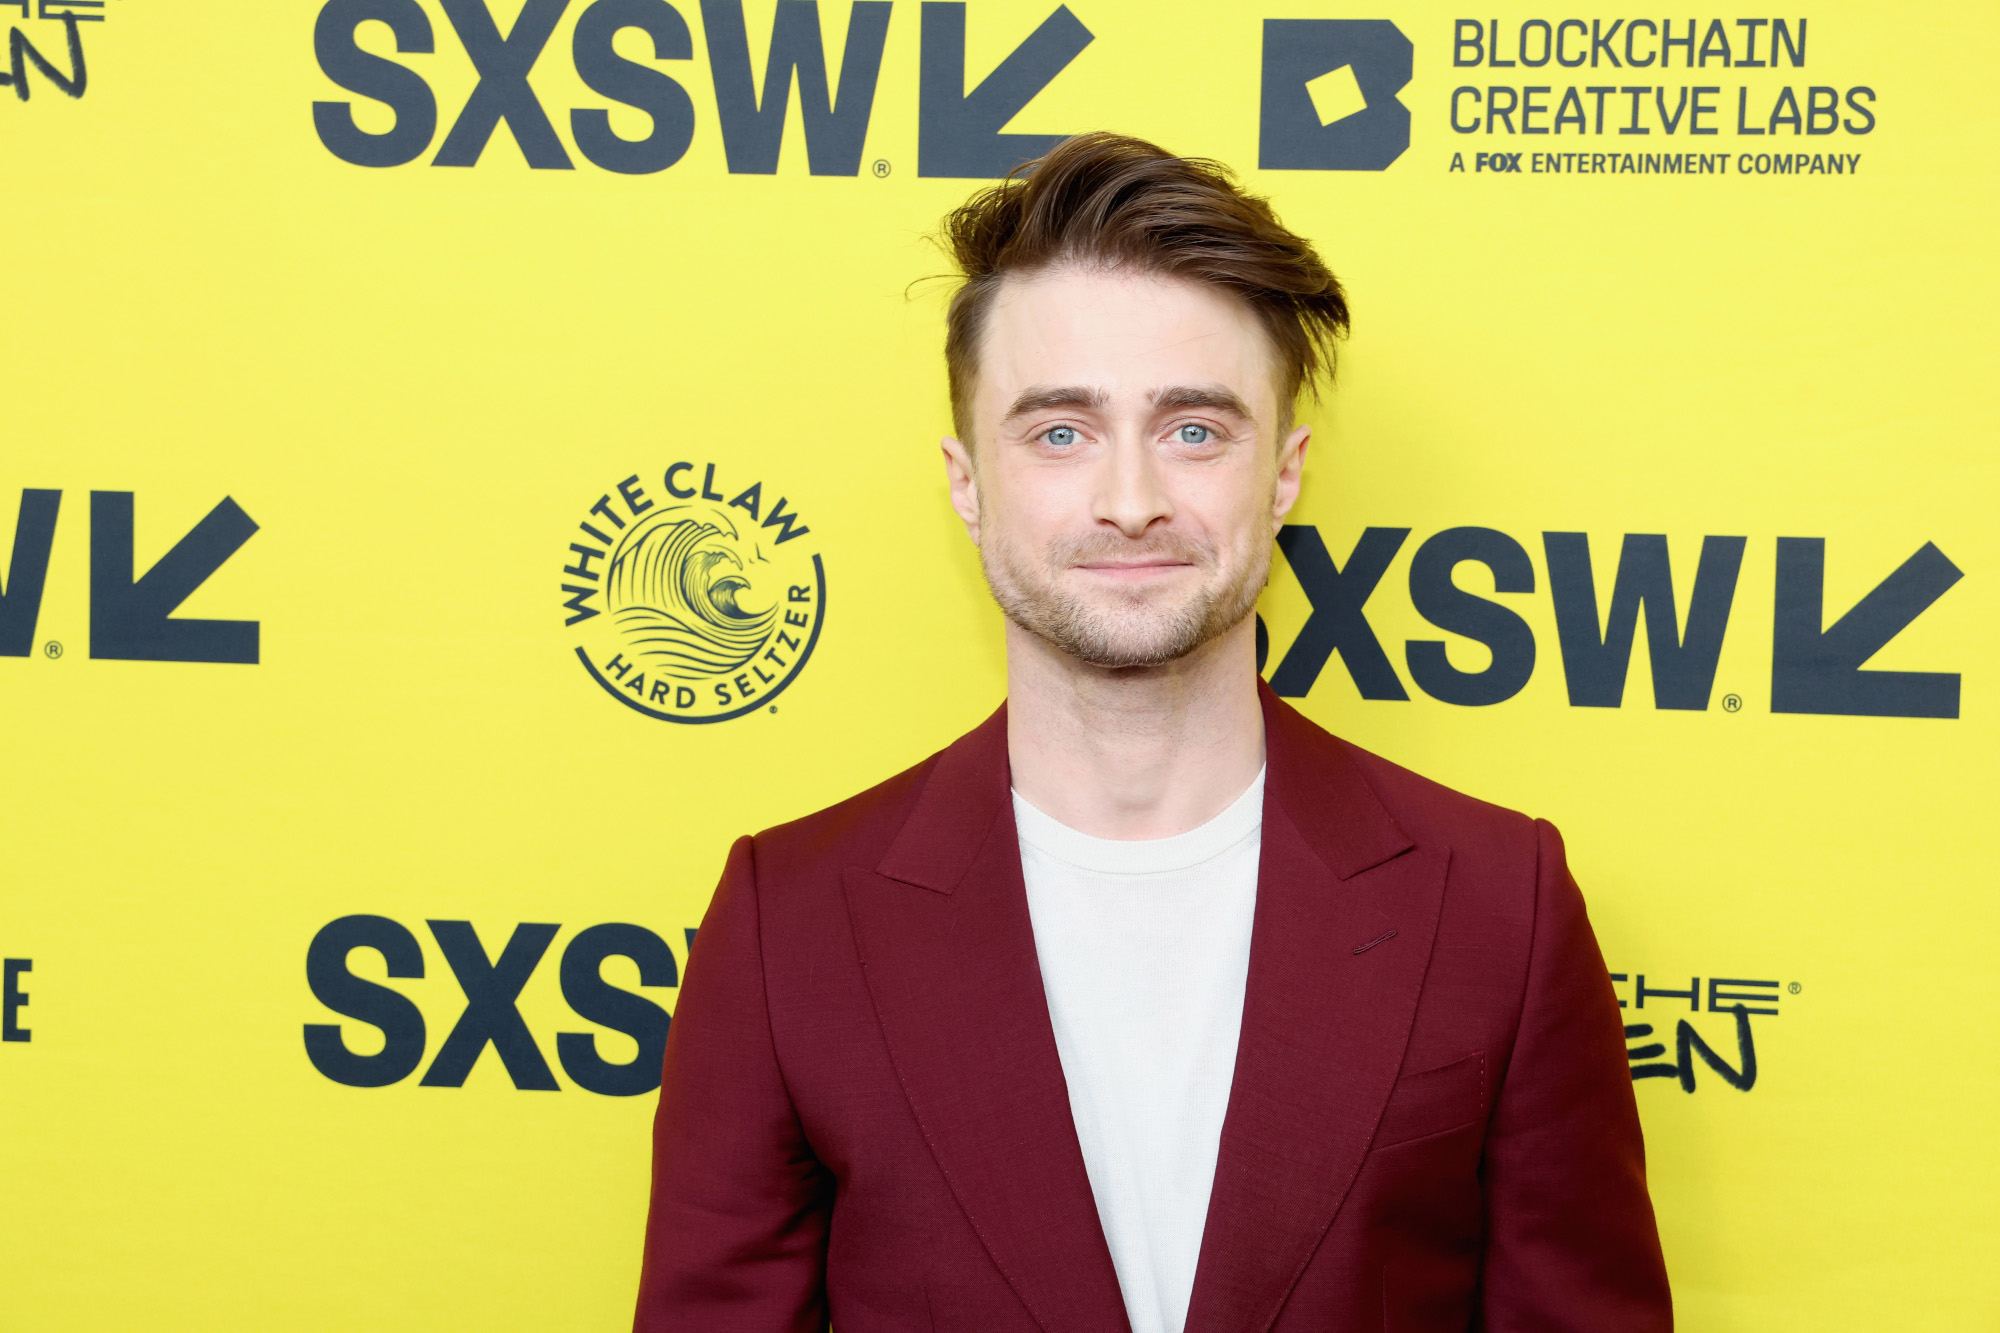 Daniel Radcliffe on the red carpet at SXSW. He's standing in front of a bright yellow wall and wearing a red jacket and white shirt.